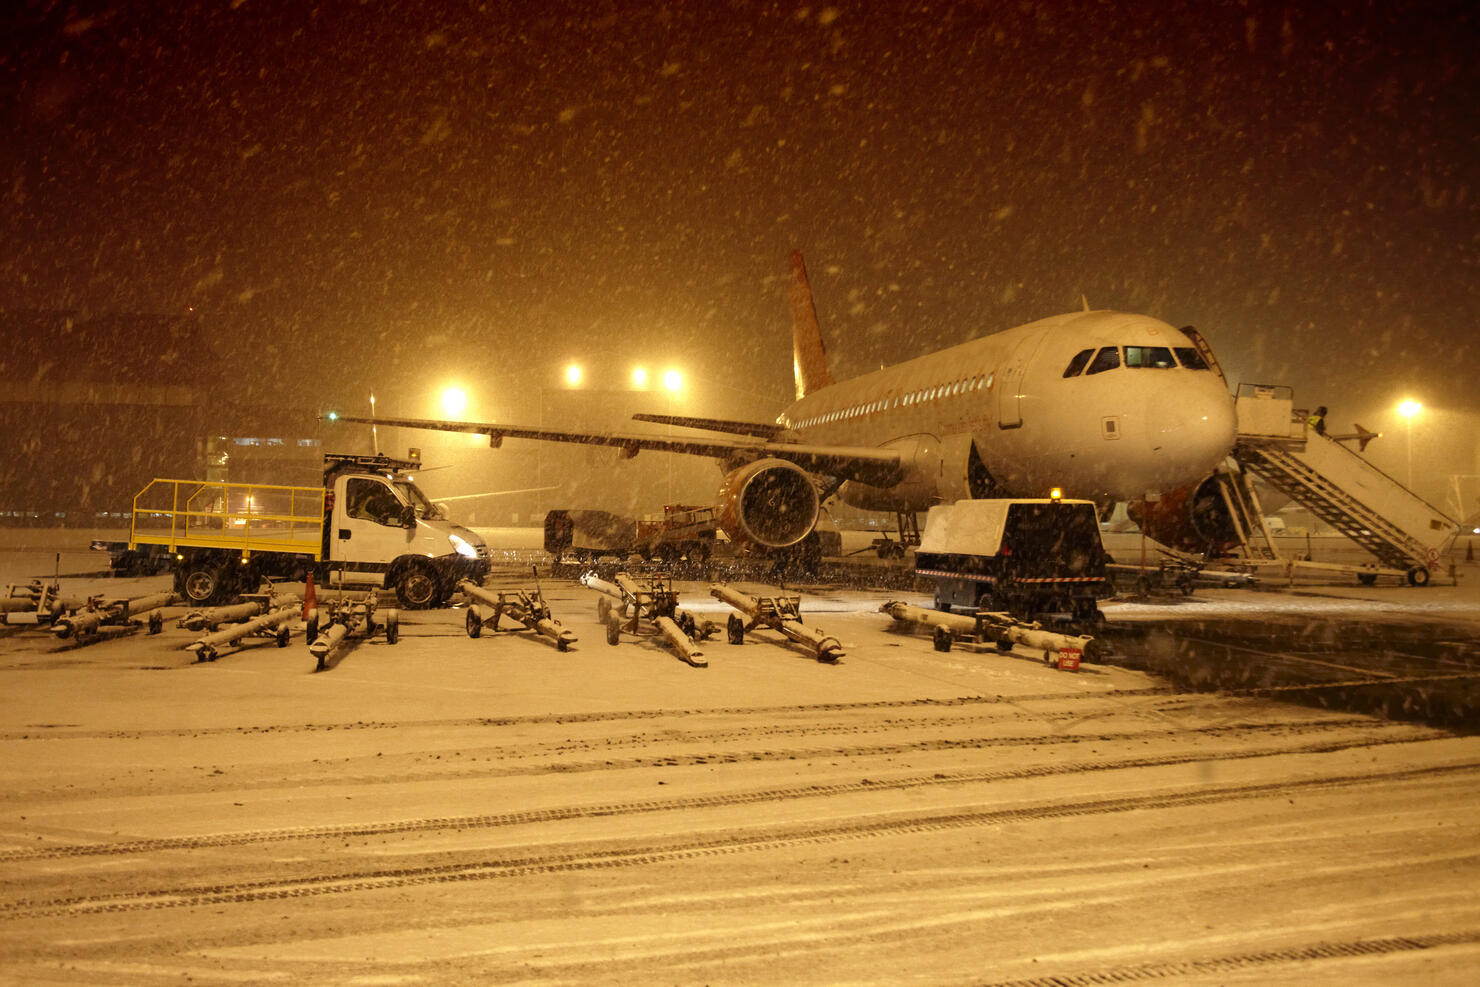 Aircraft in snow blizzard at airport